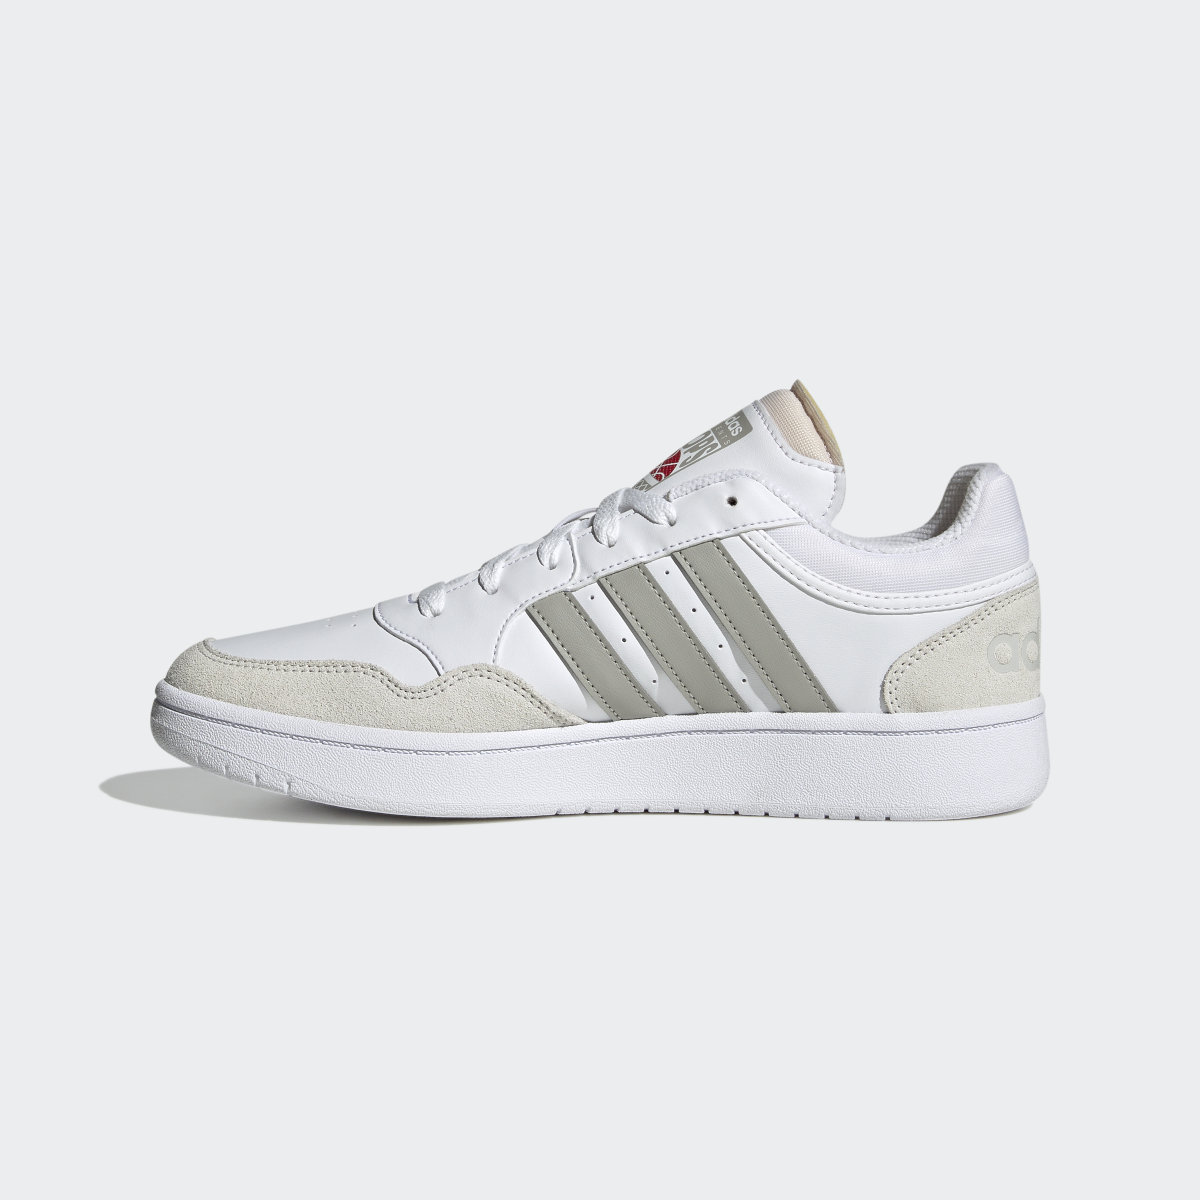 Adidas Chaussure Hoops 3.0 Lifestyle Basketball Low Classic Vintage. 7